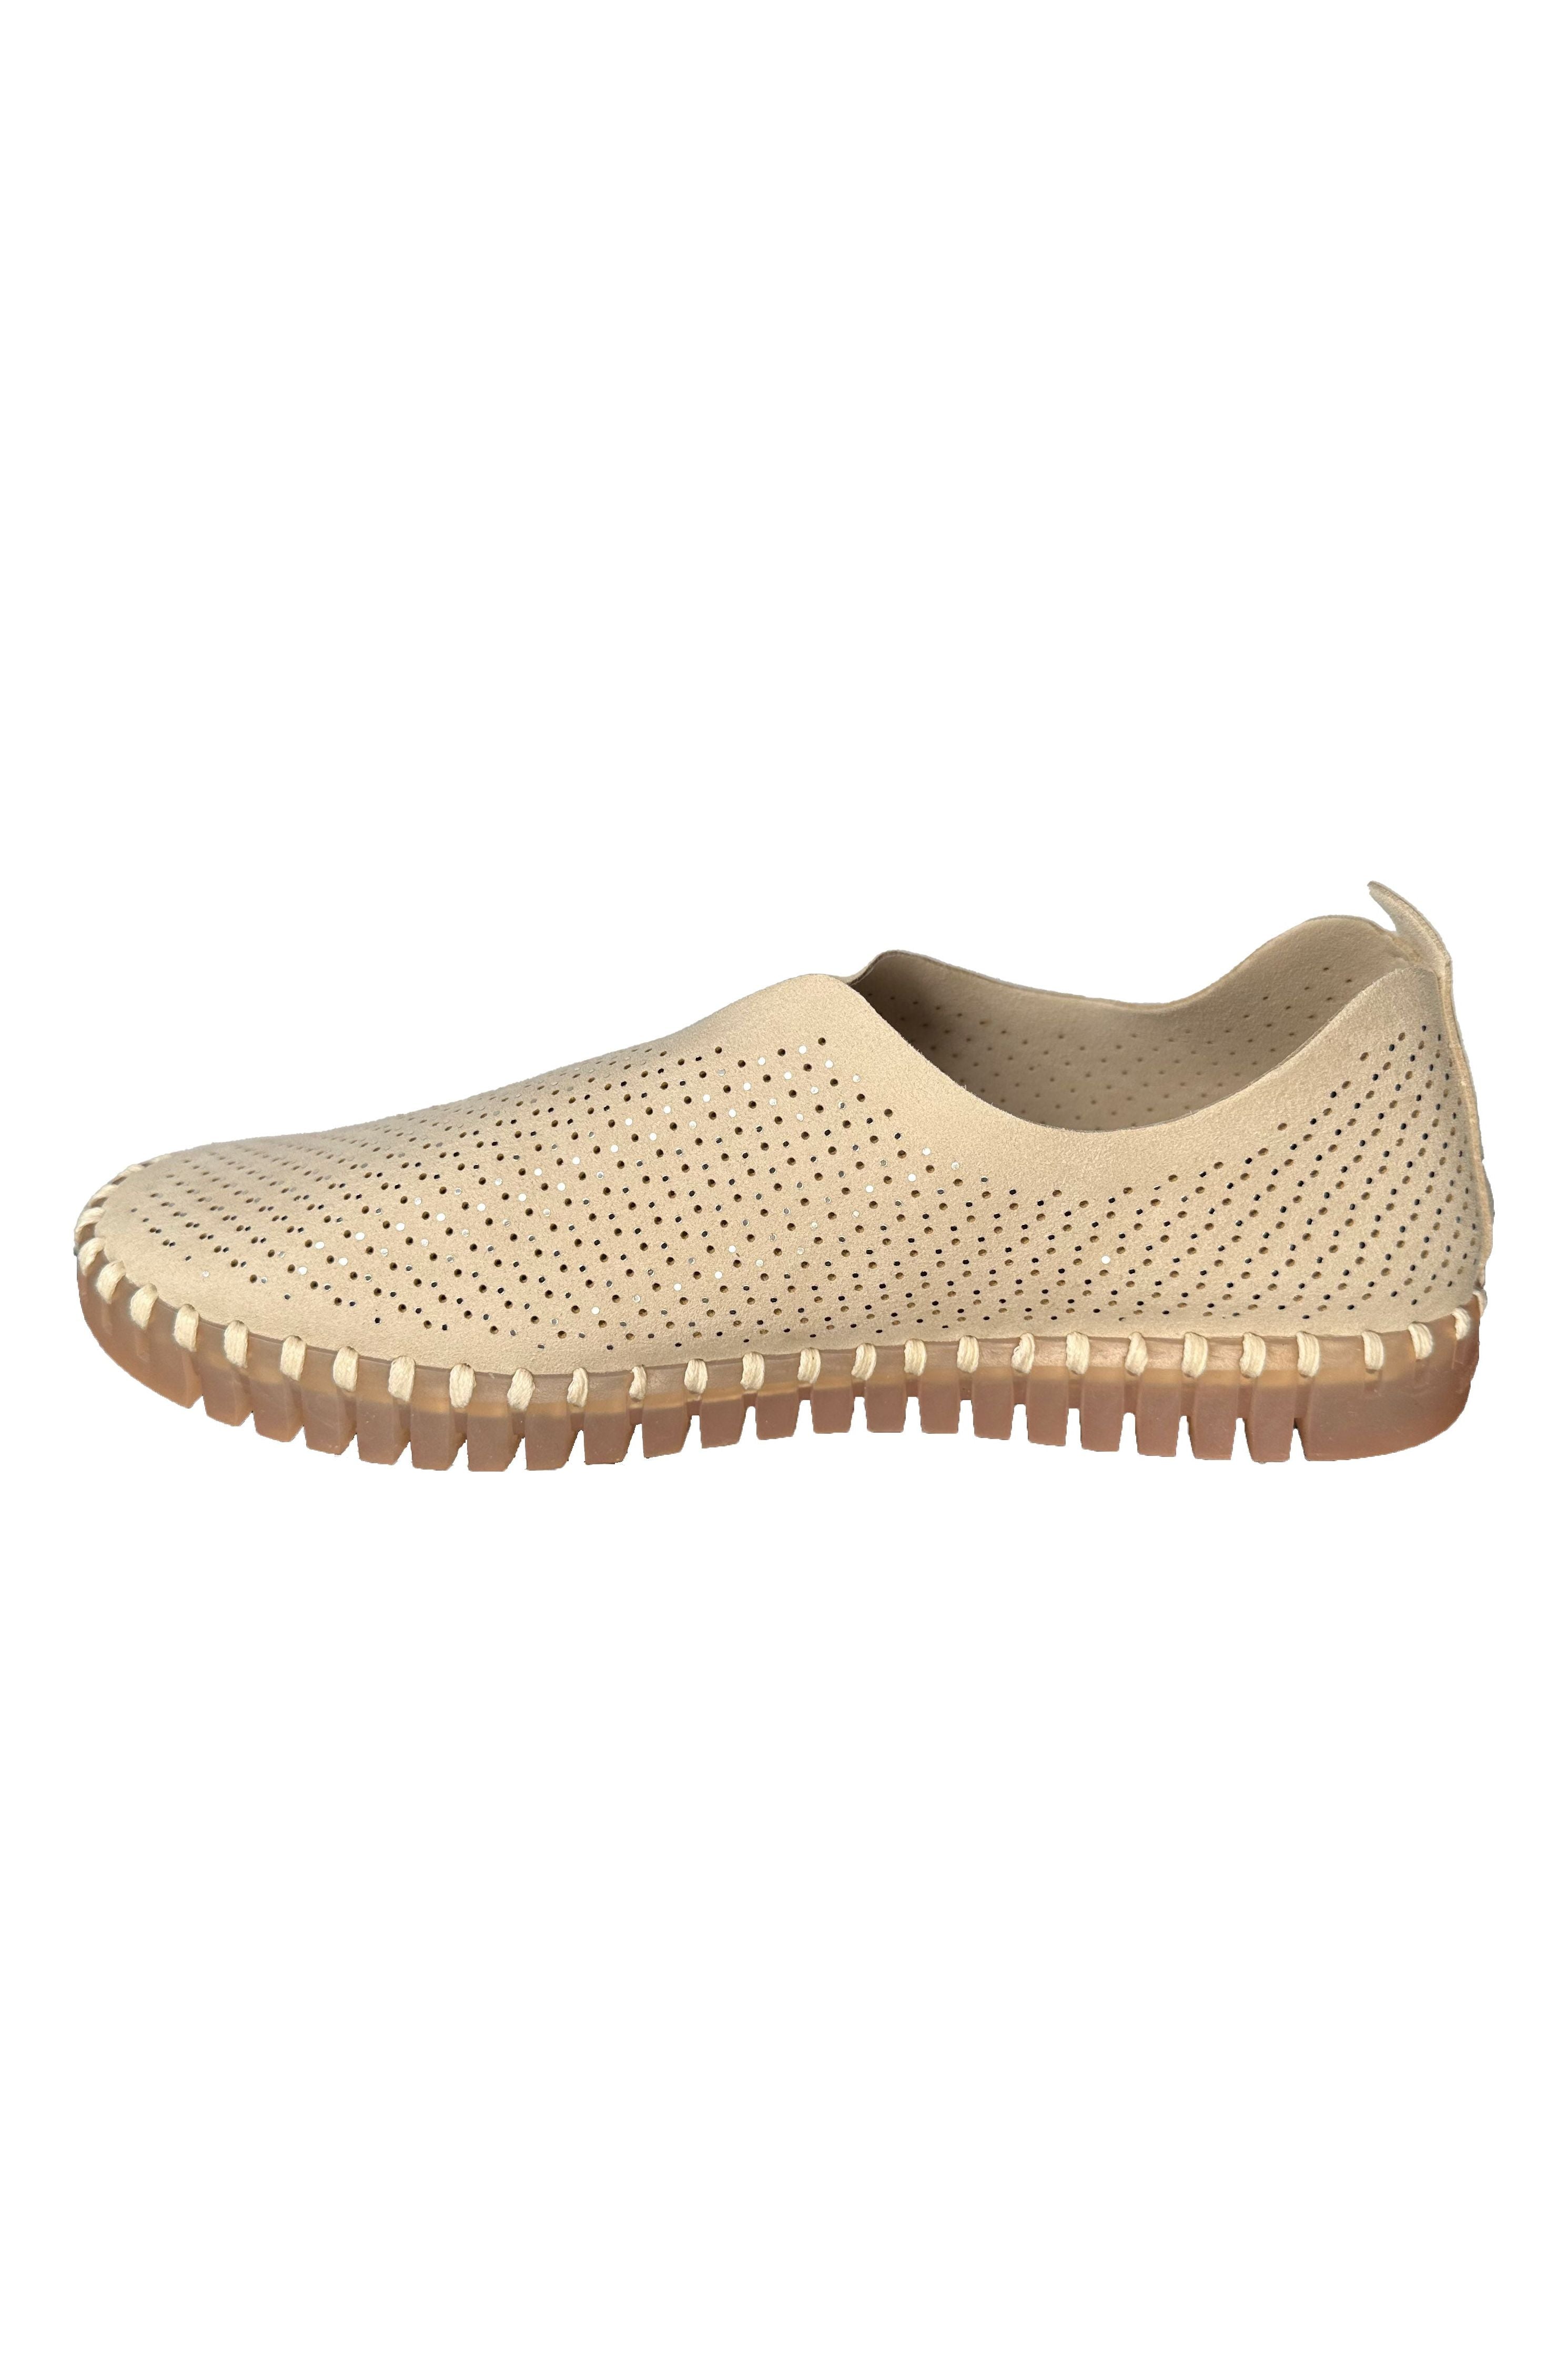 Jacobsen Hornbæk Tulip138 LUX Sparkle Perforated Slip On Sneakers – Robertson Madison